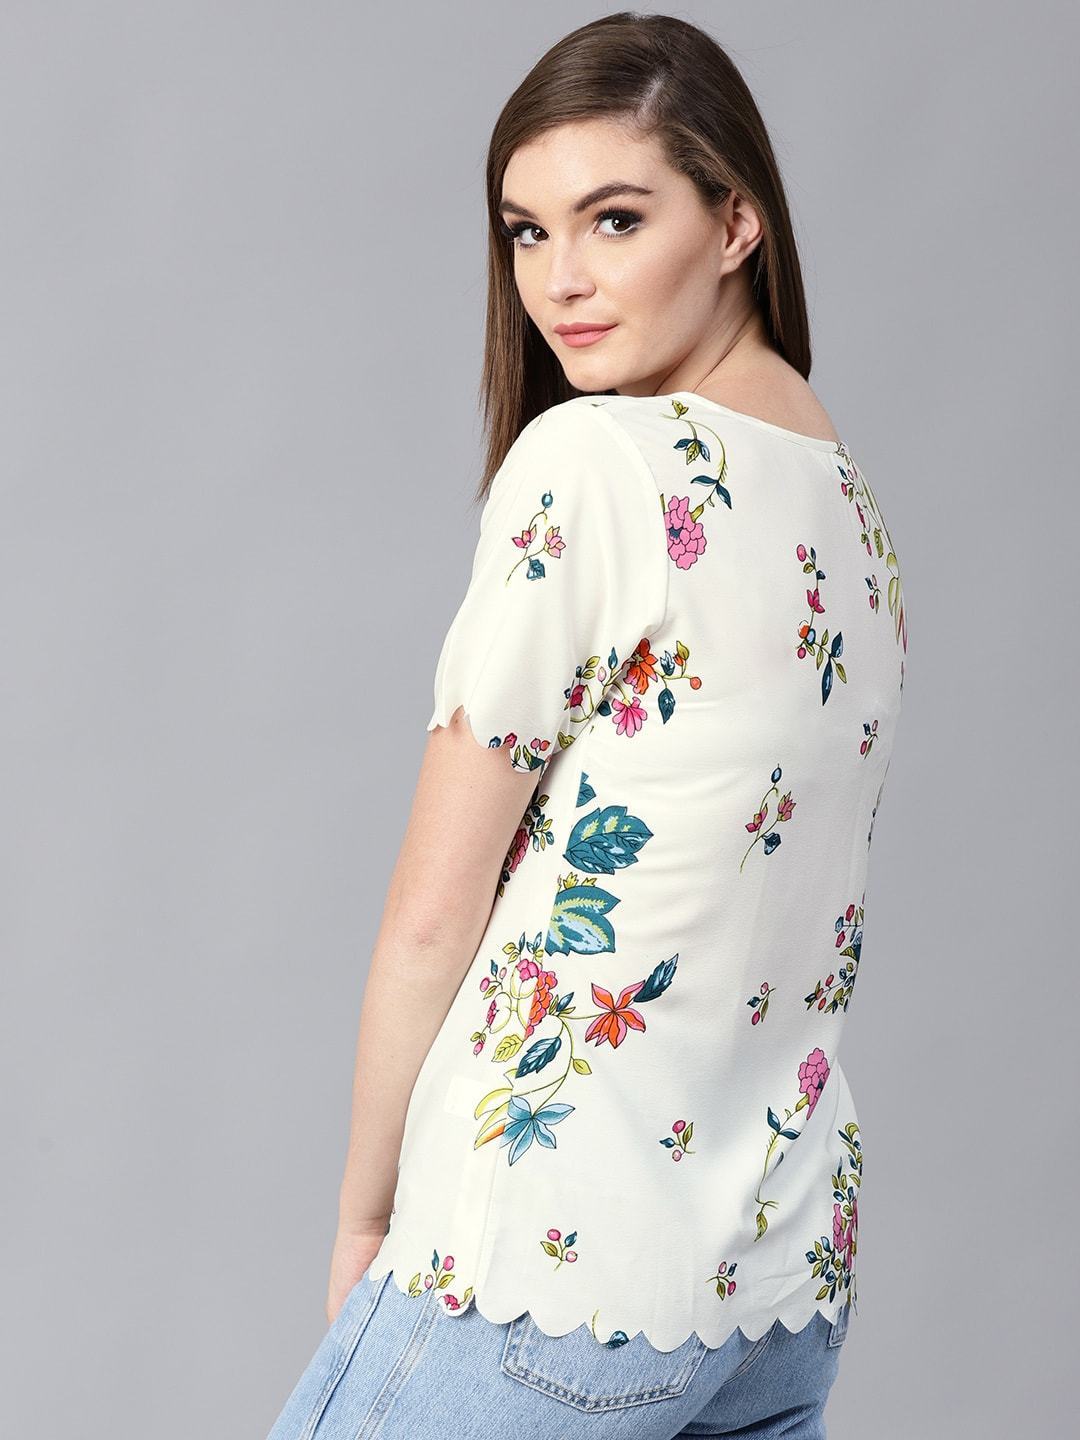 Women's Floral Scalloped Top - Pannkh